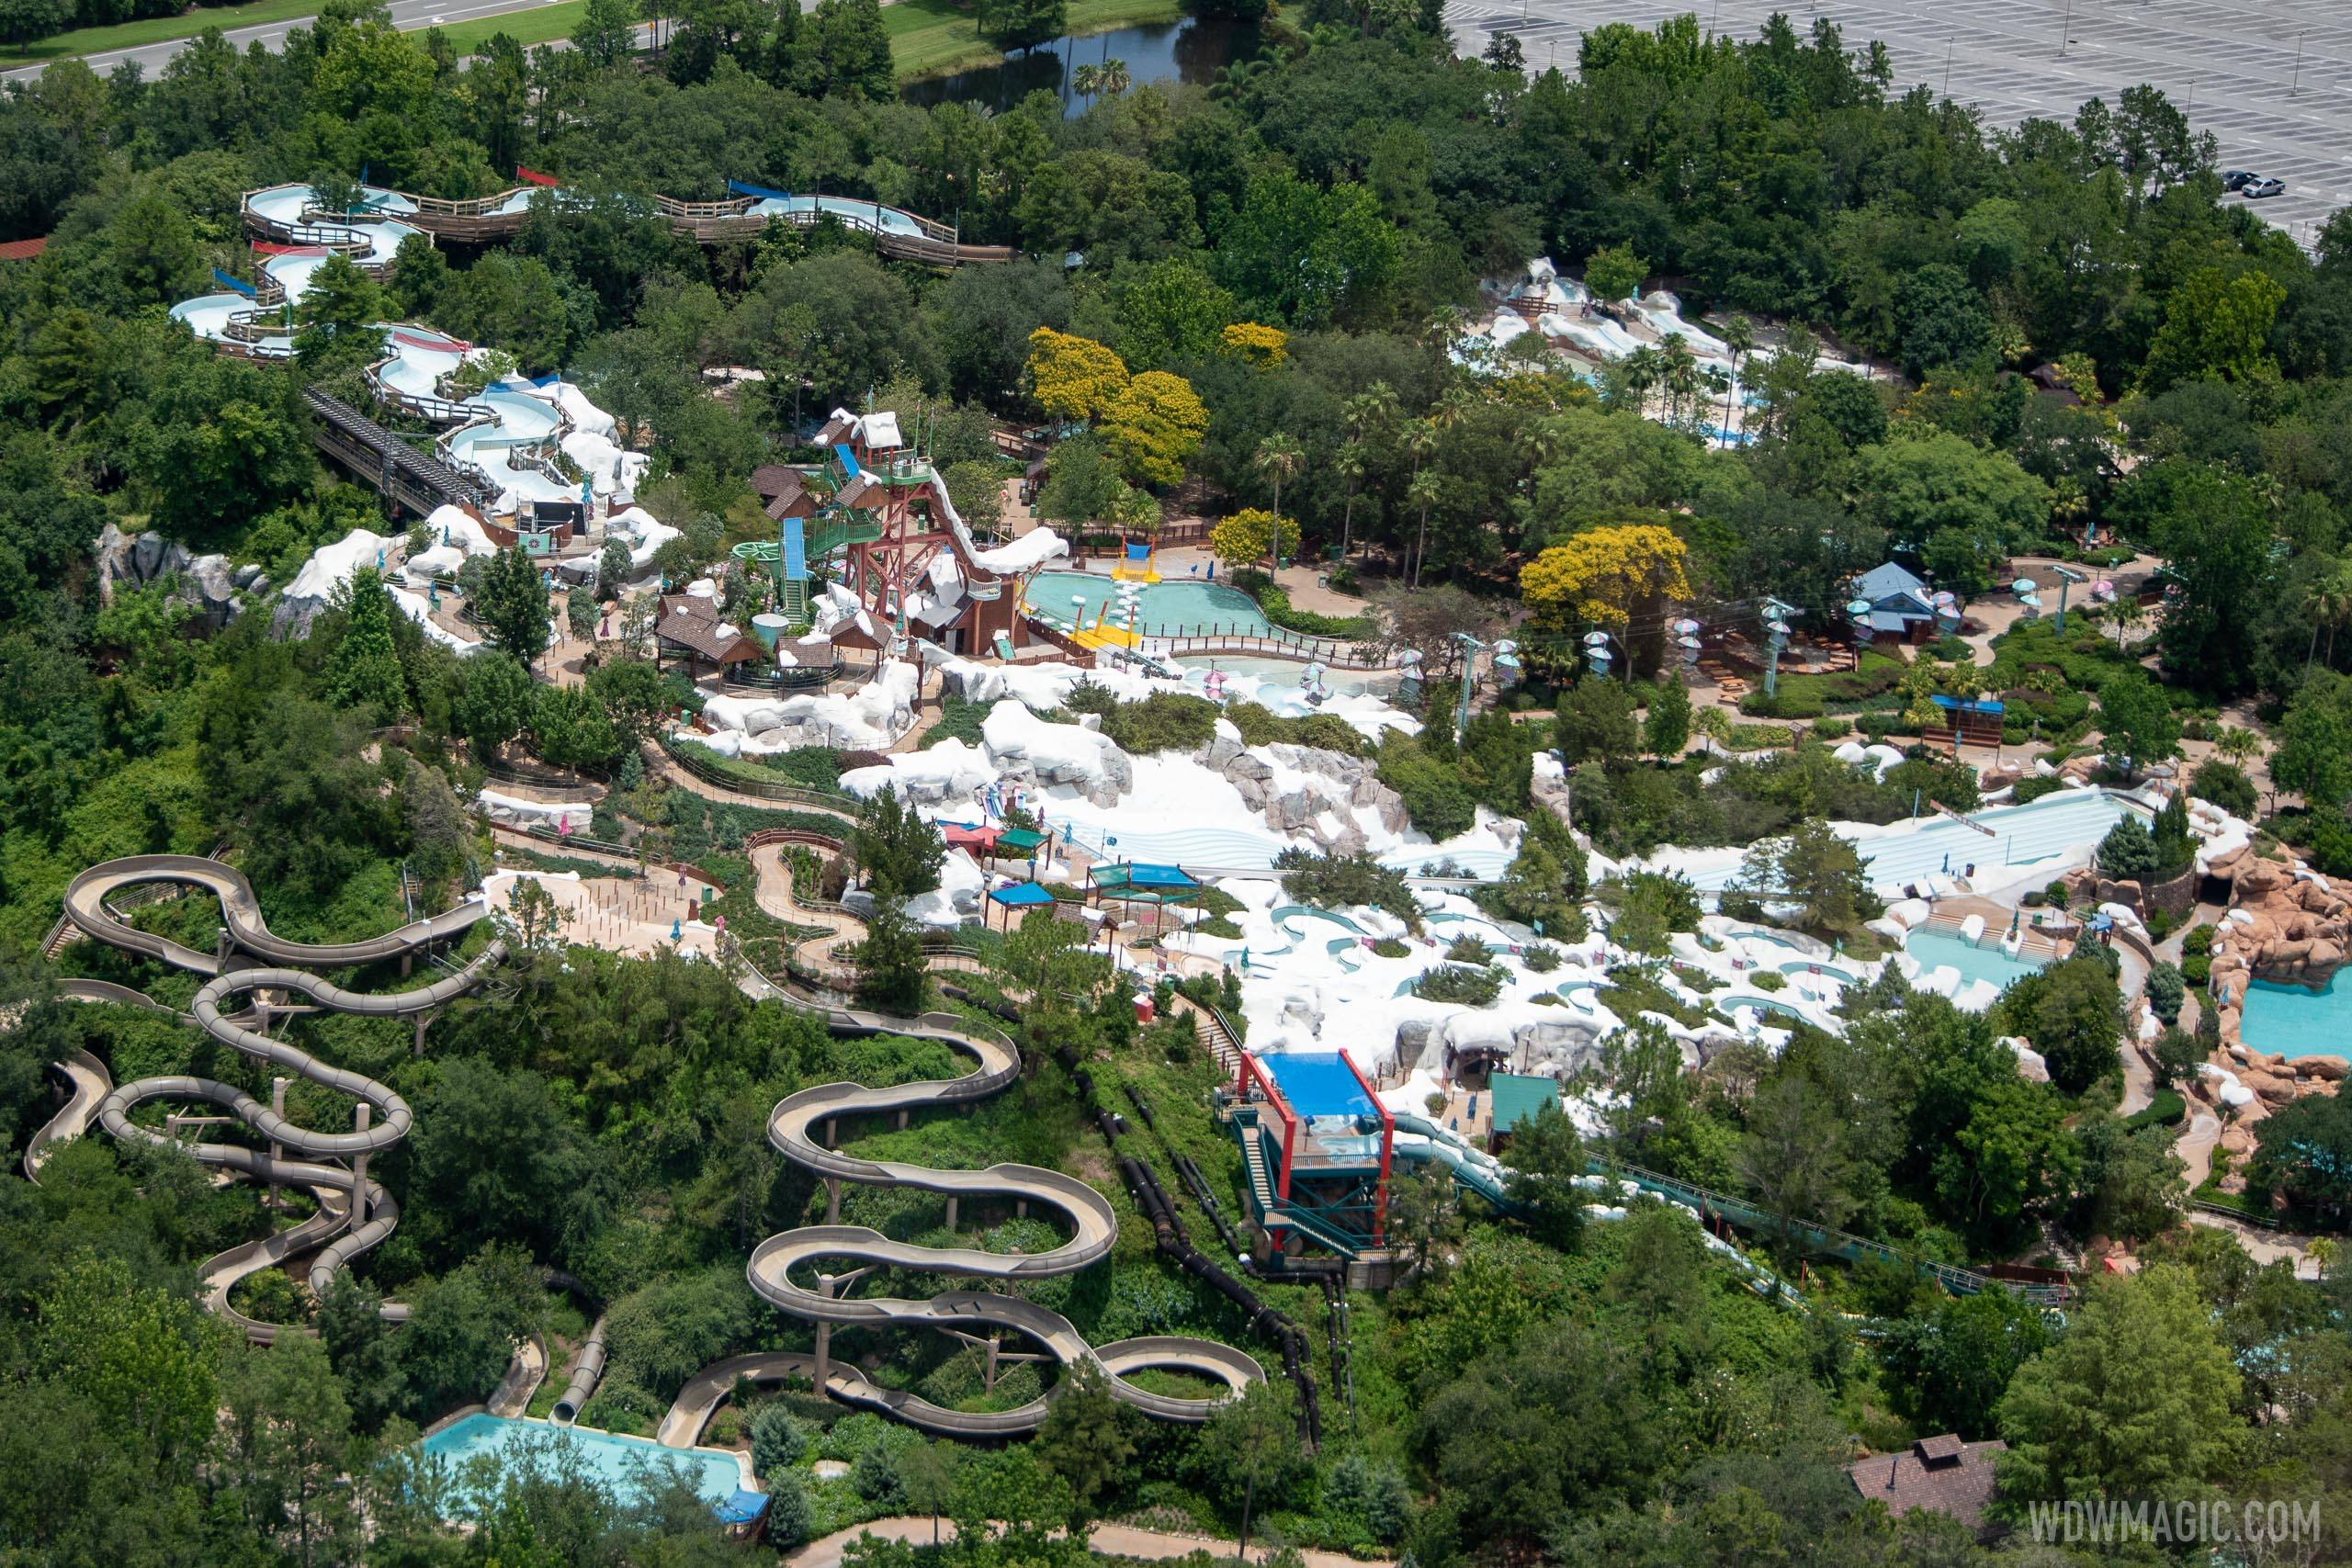 Blizzard Beach will be closed for 2 days this weekend